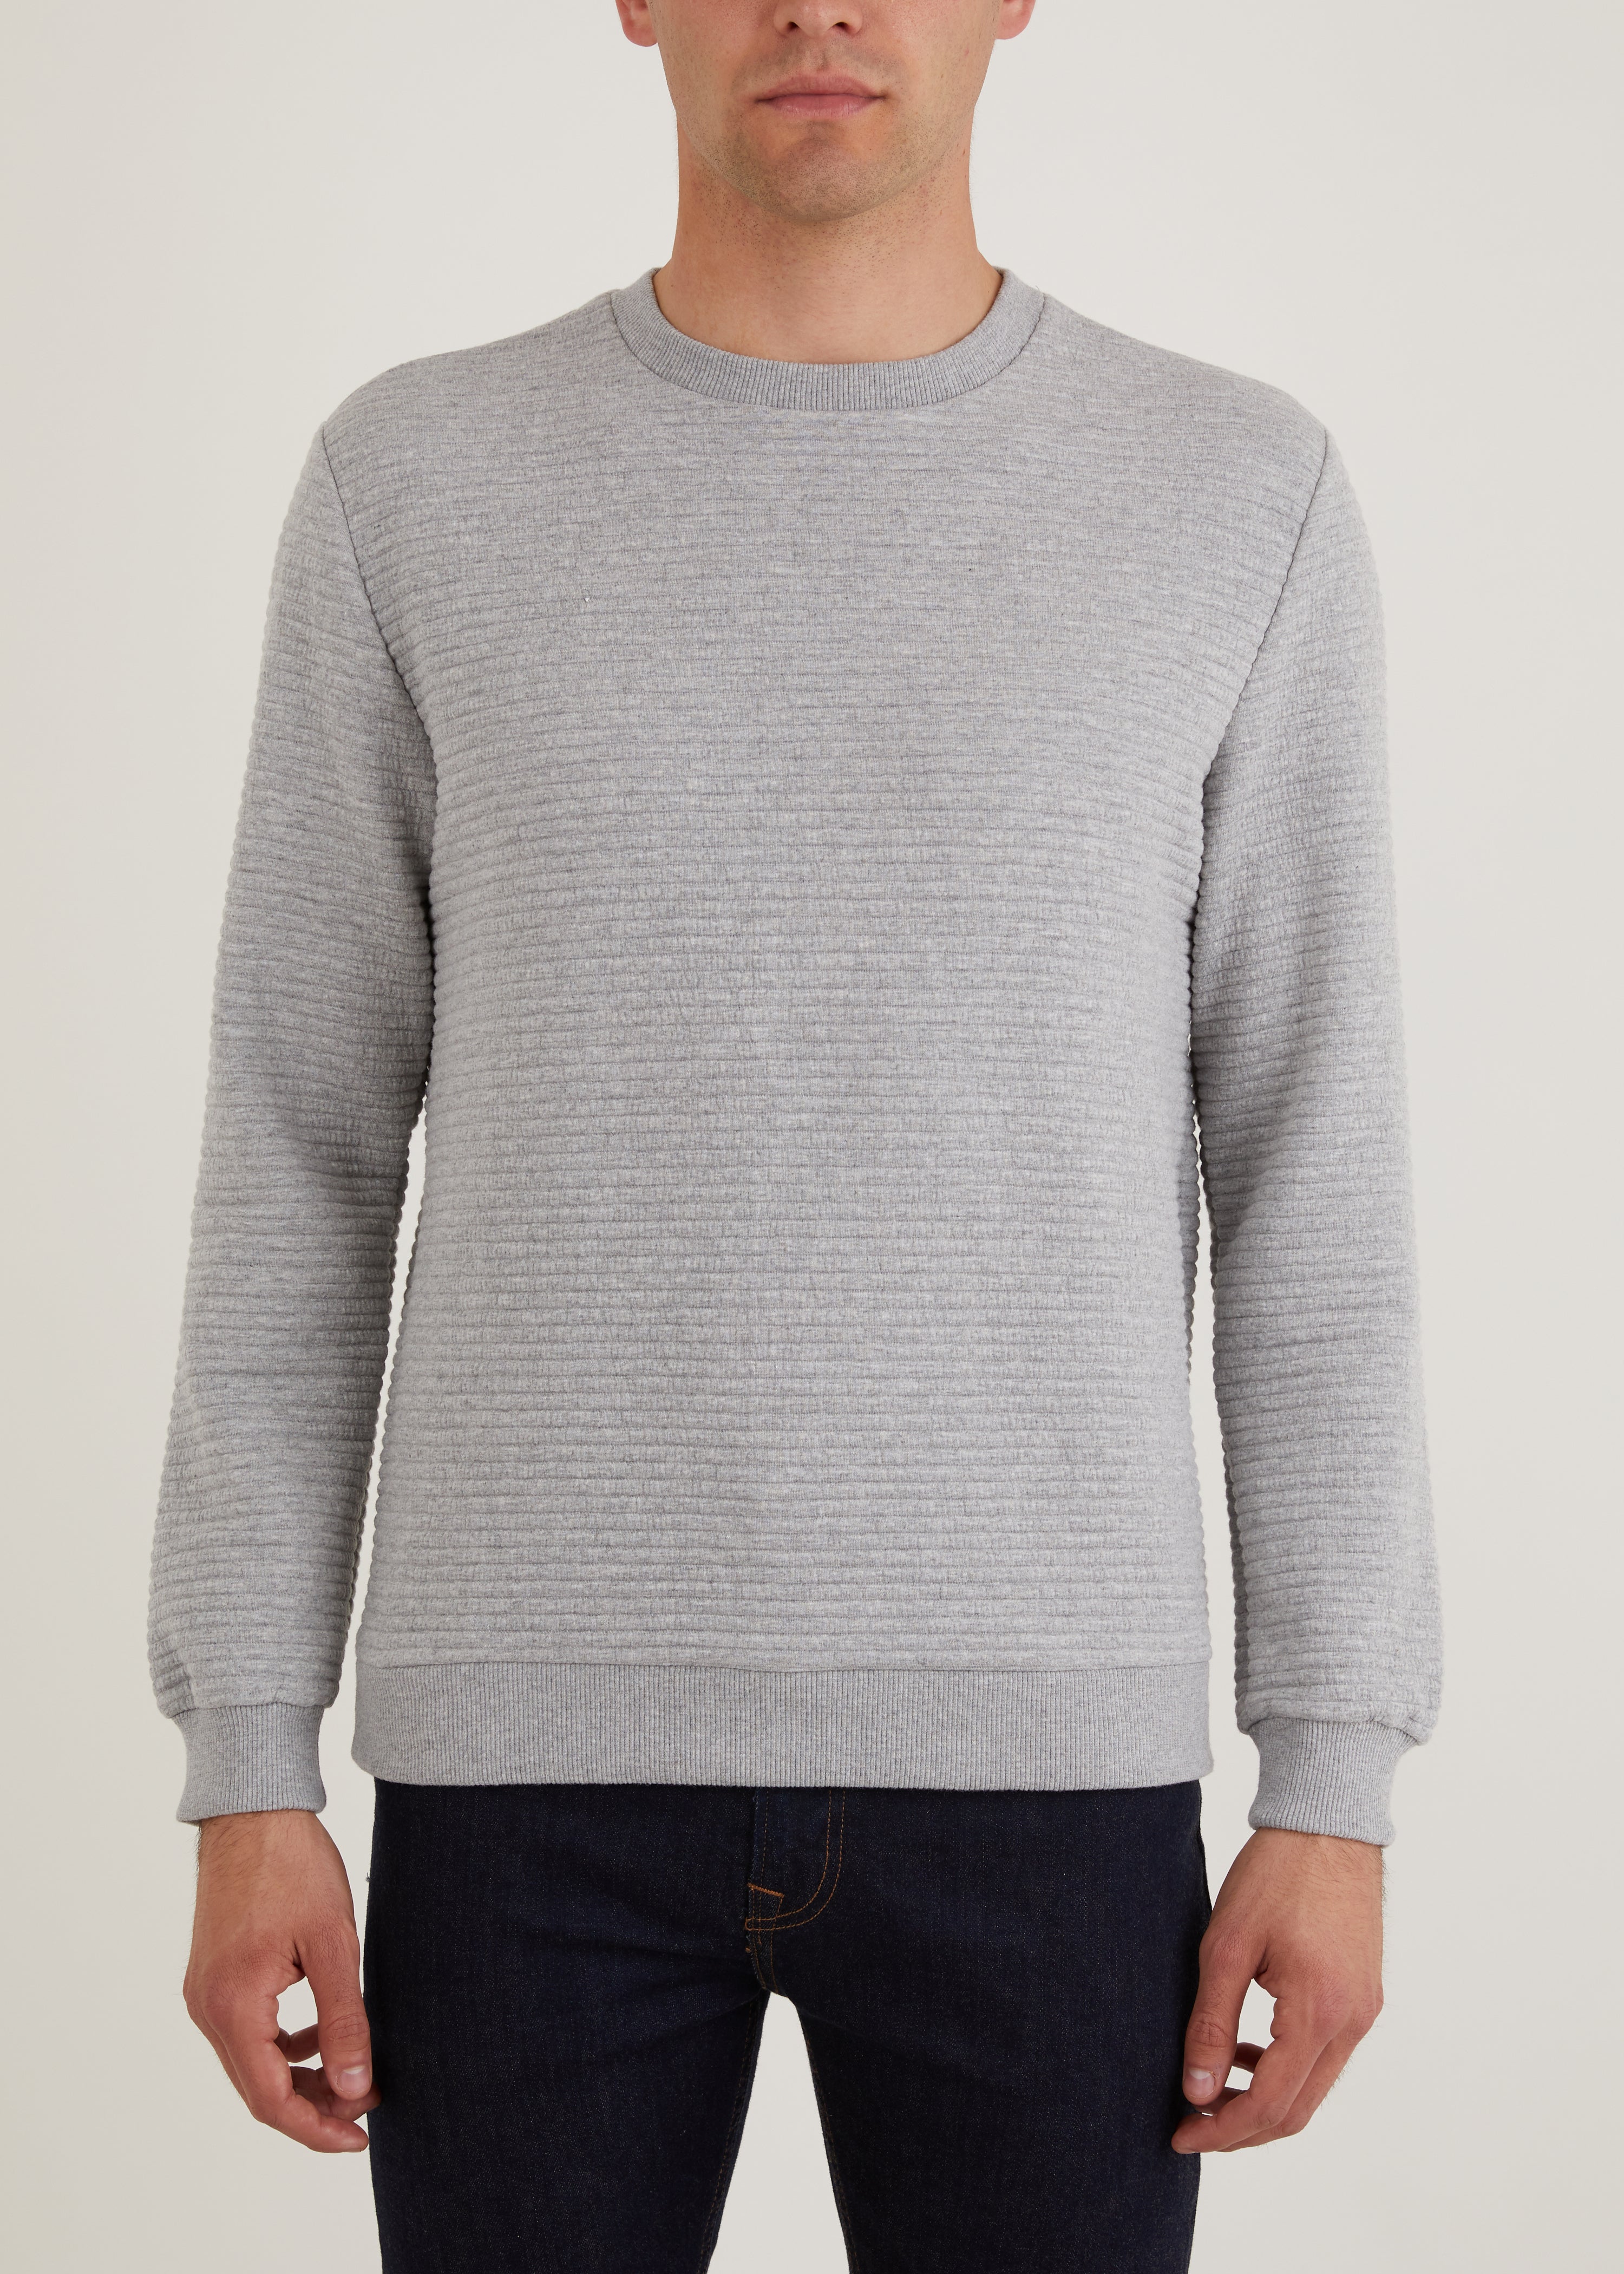 Peter Werth Jumpers & Sweaters For Men